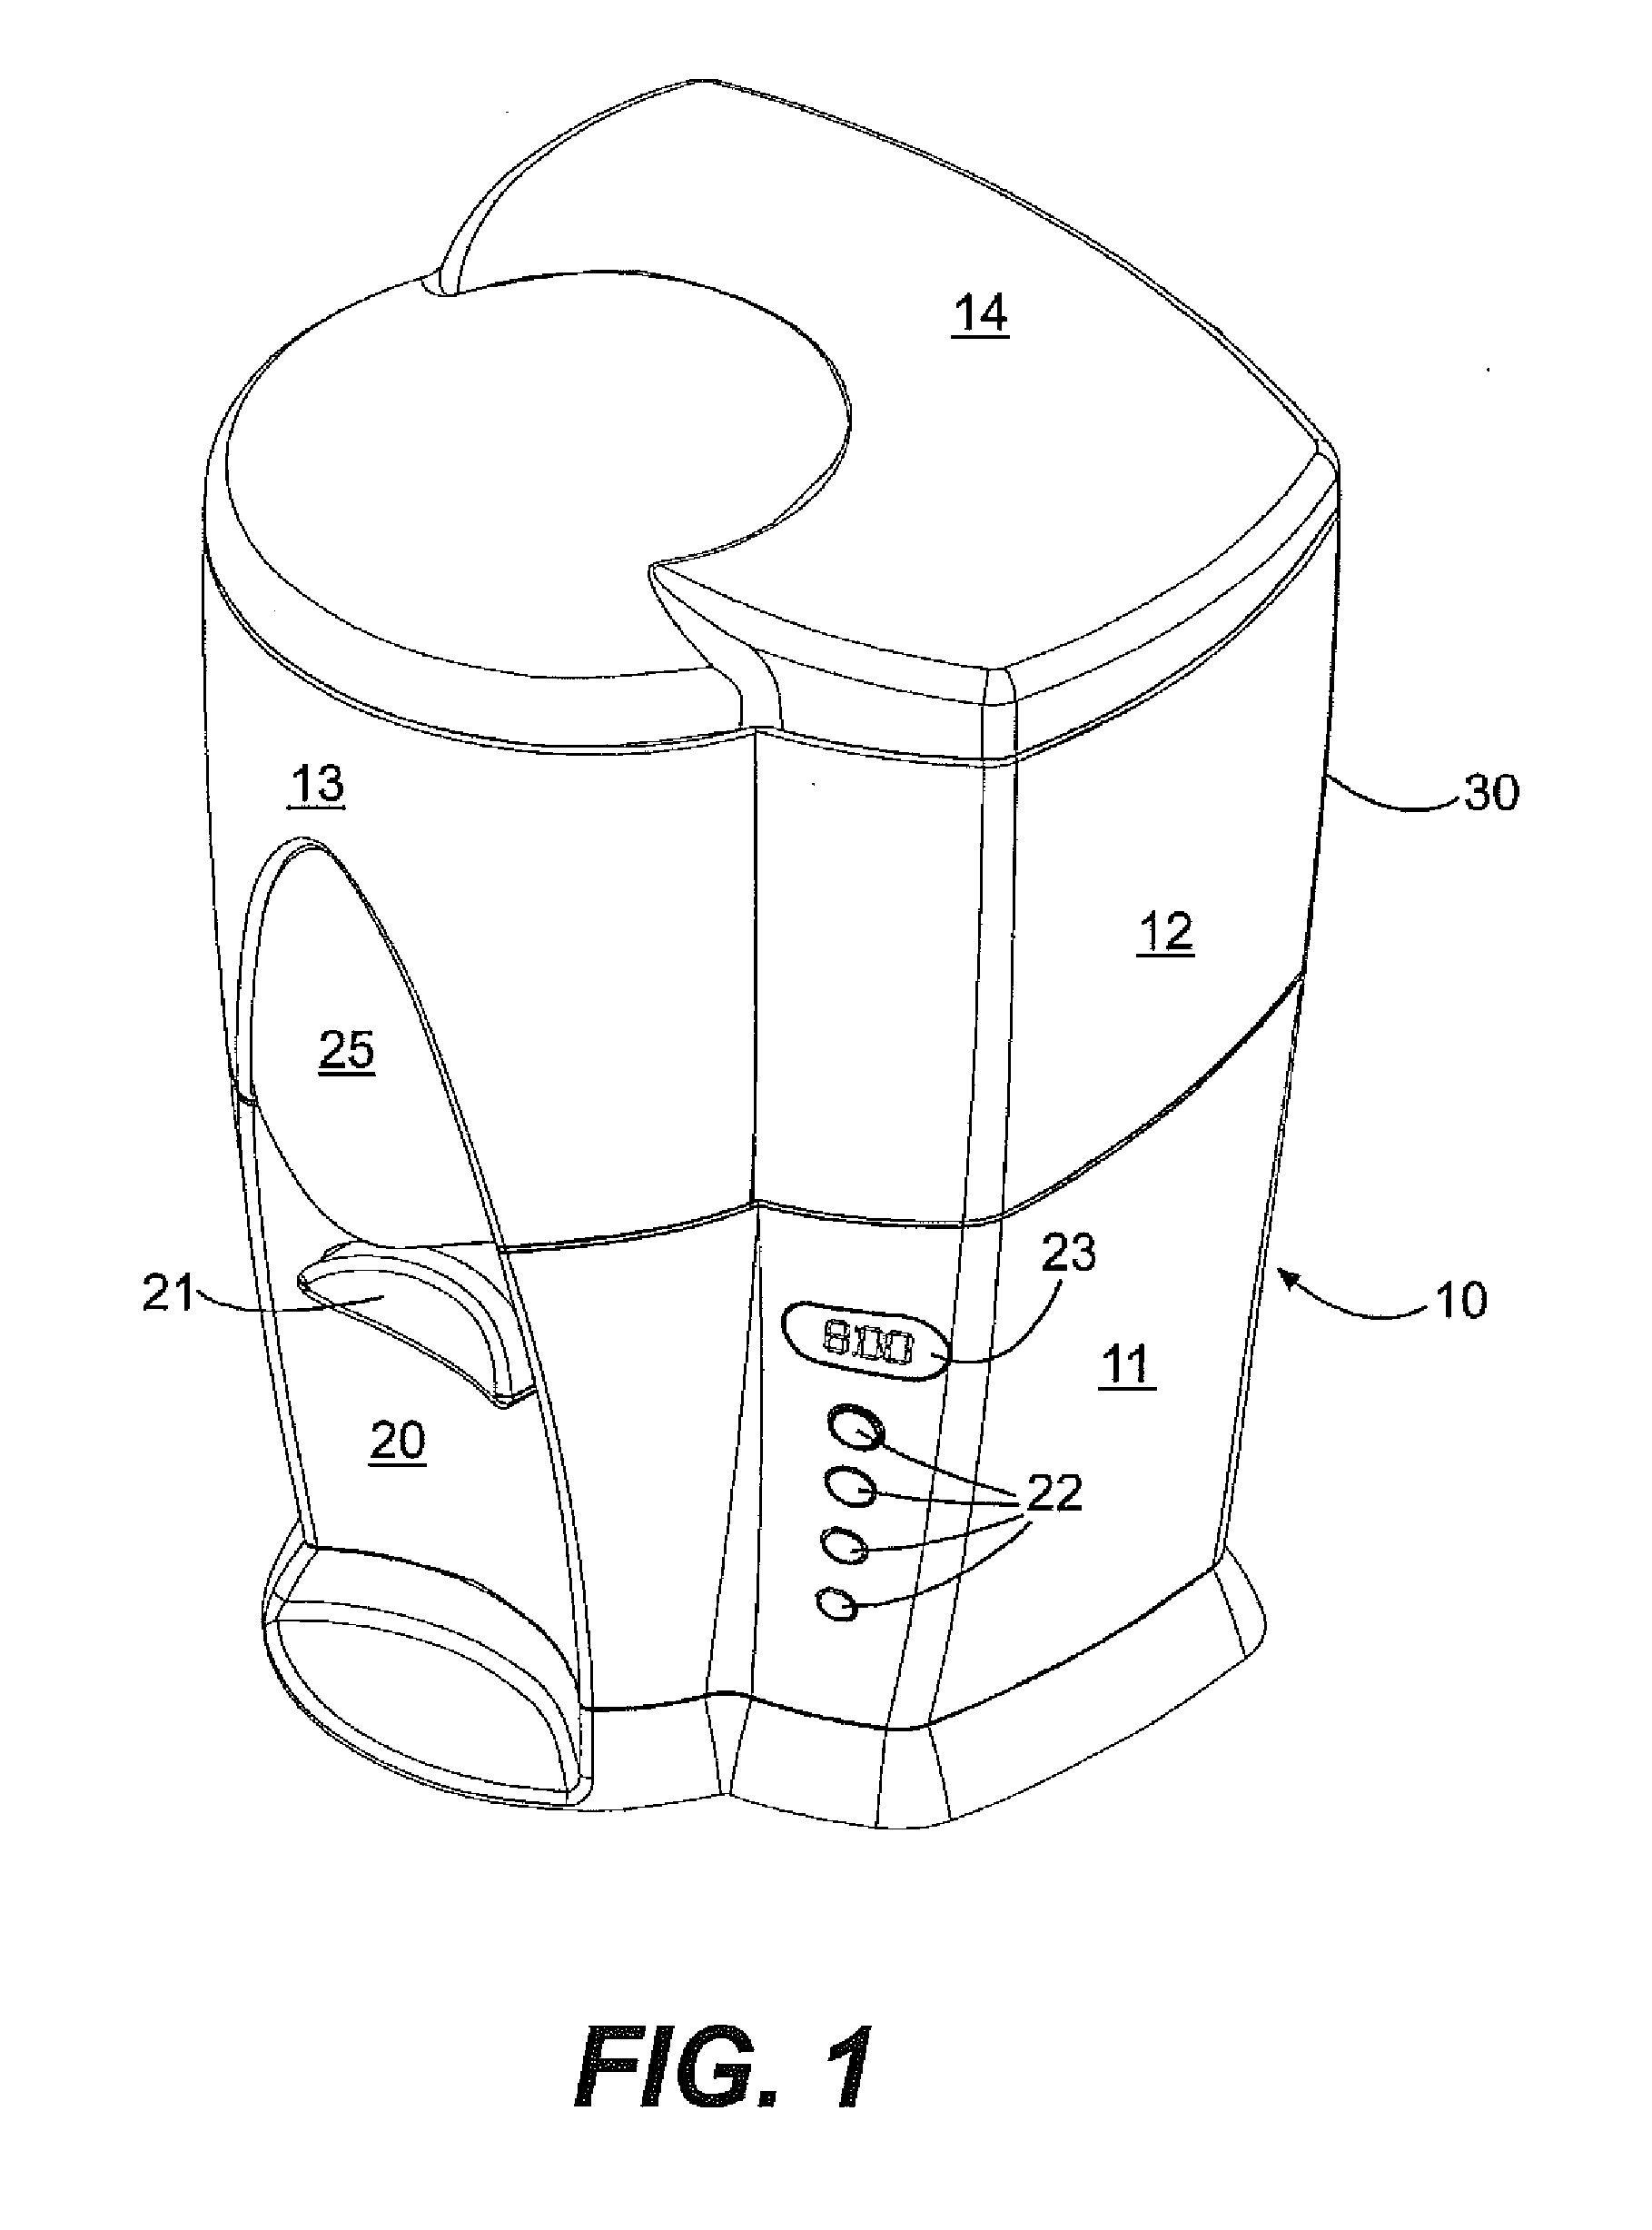 Hot beverage maker with cup-actuated dispenser